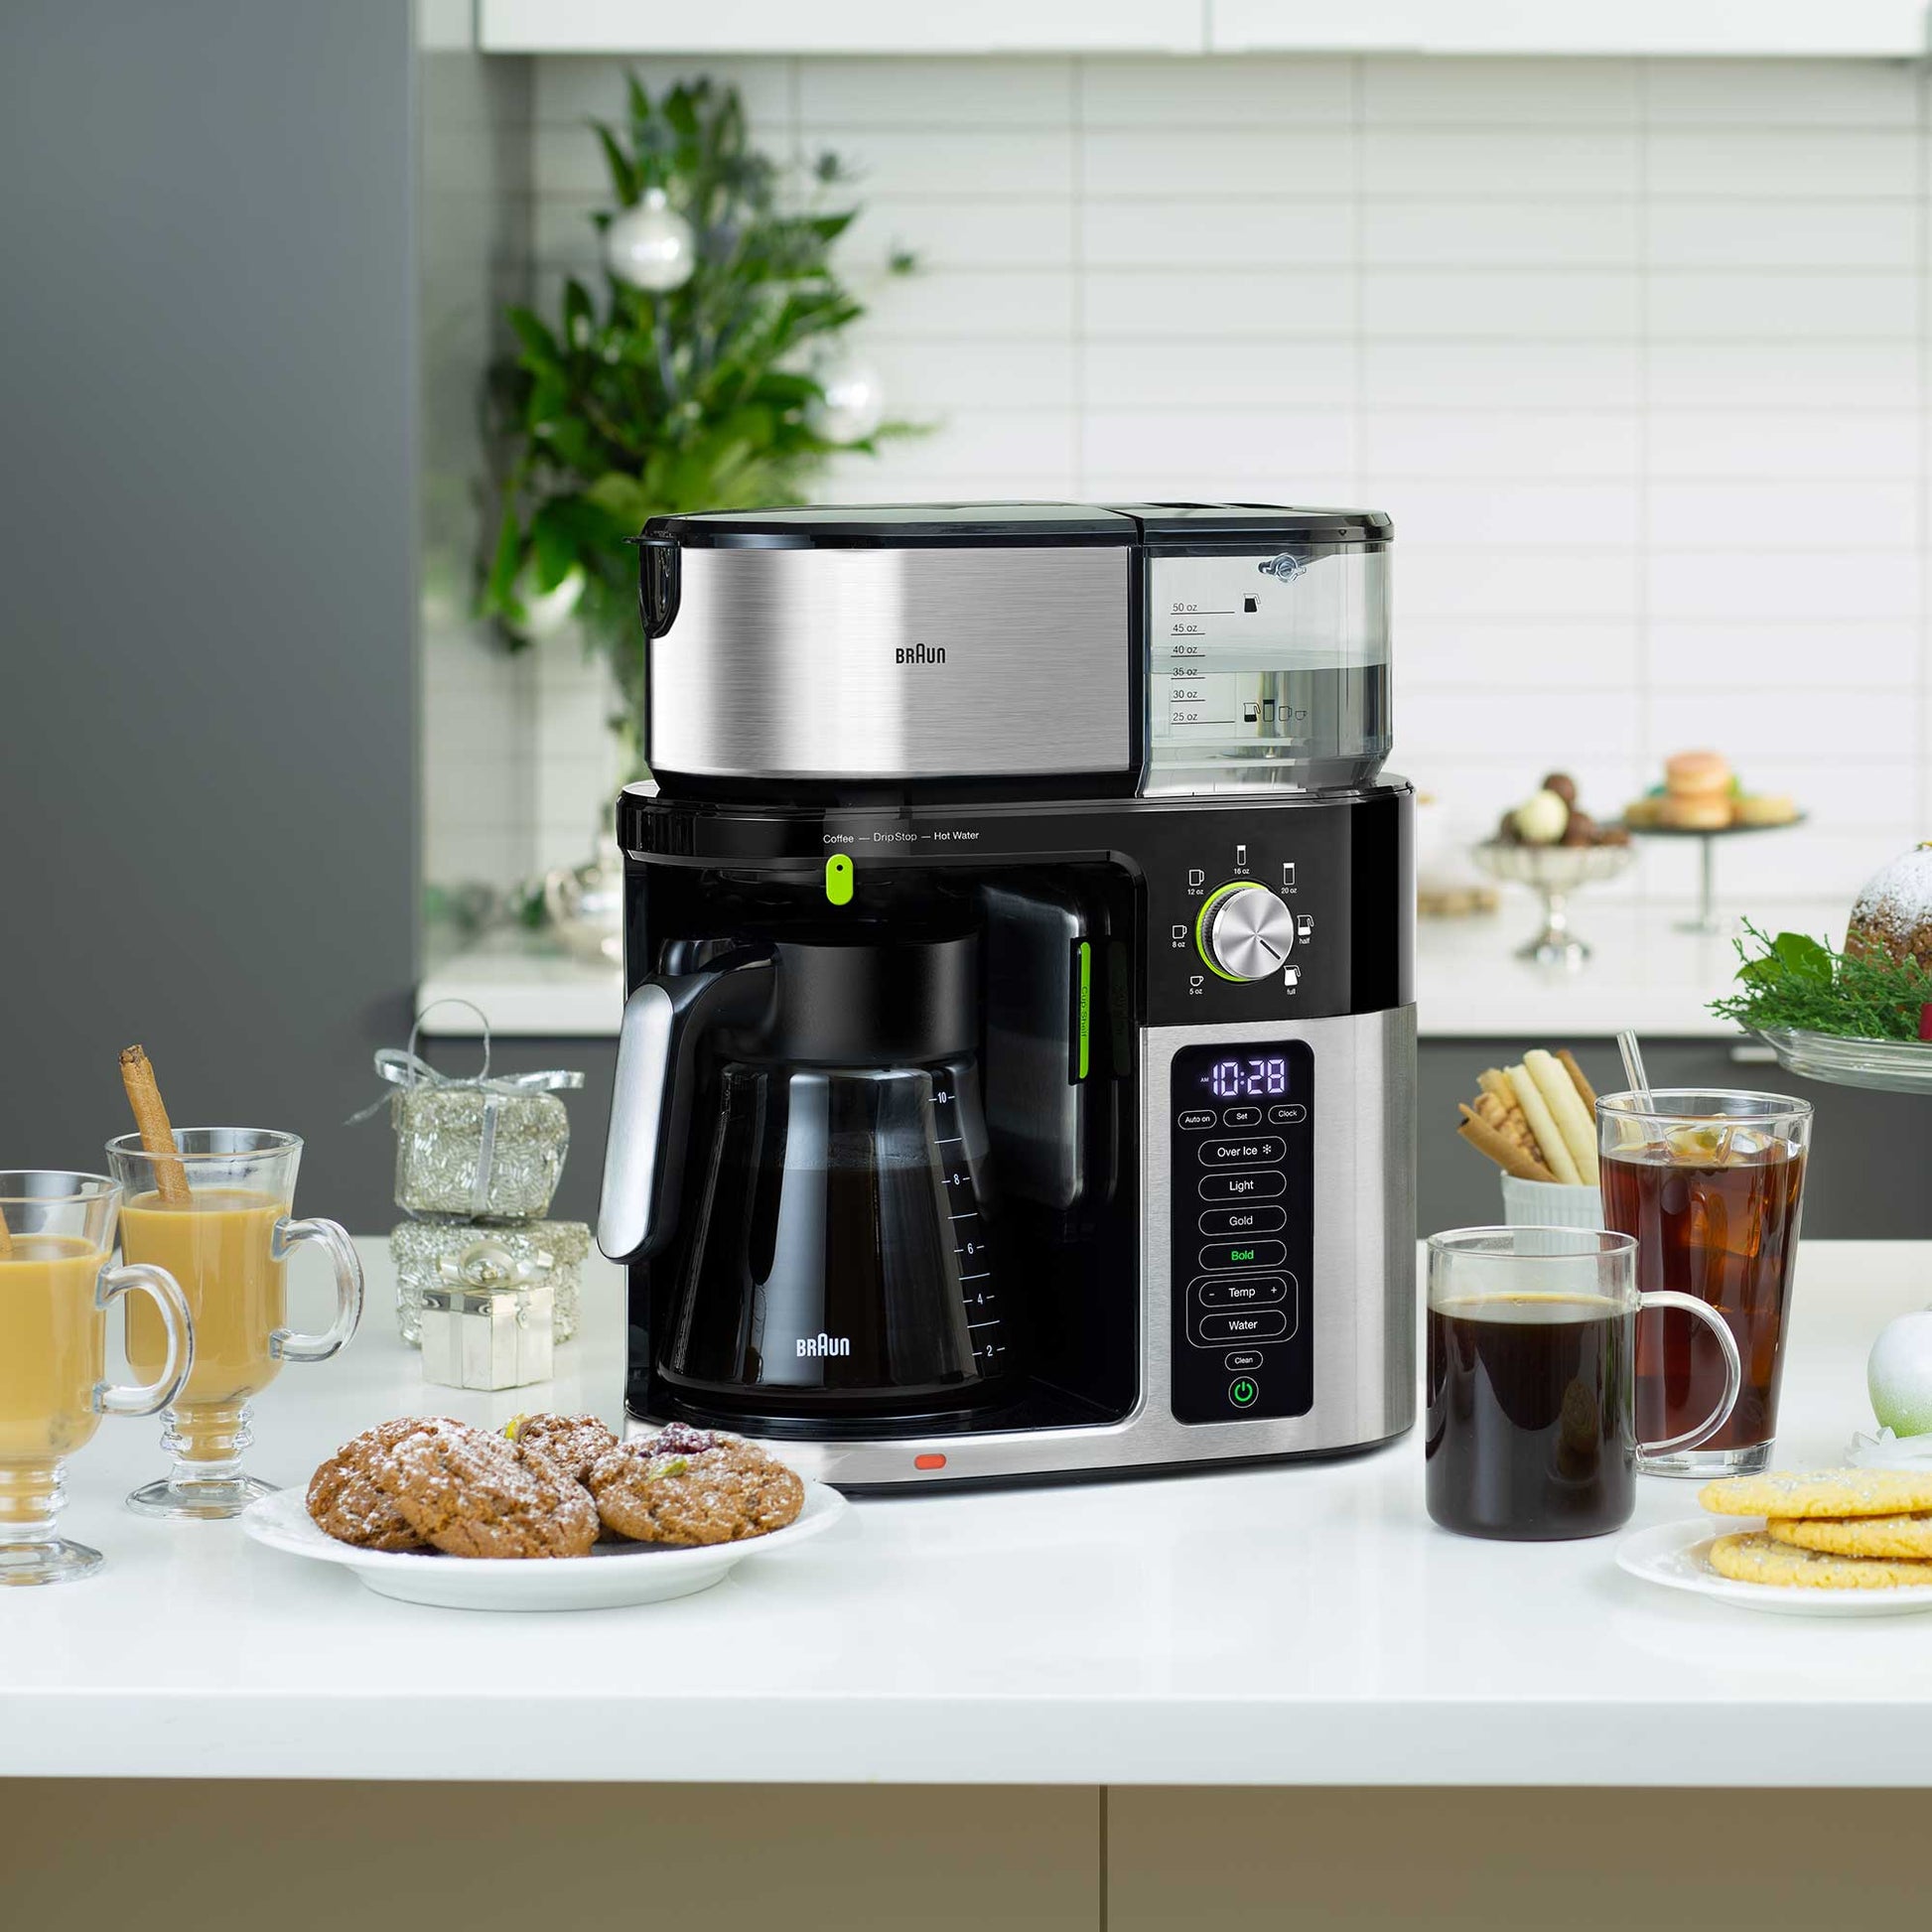 Braun MultiServe Coffee Machine Review: Finally, a Great Single